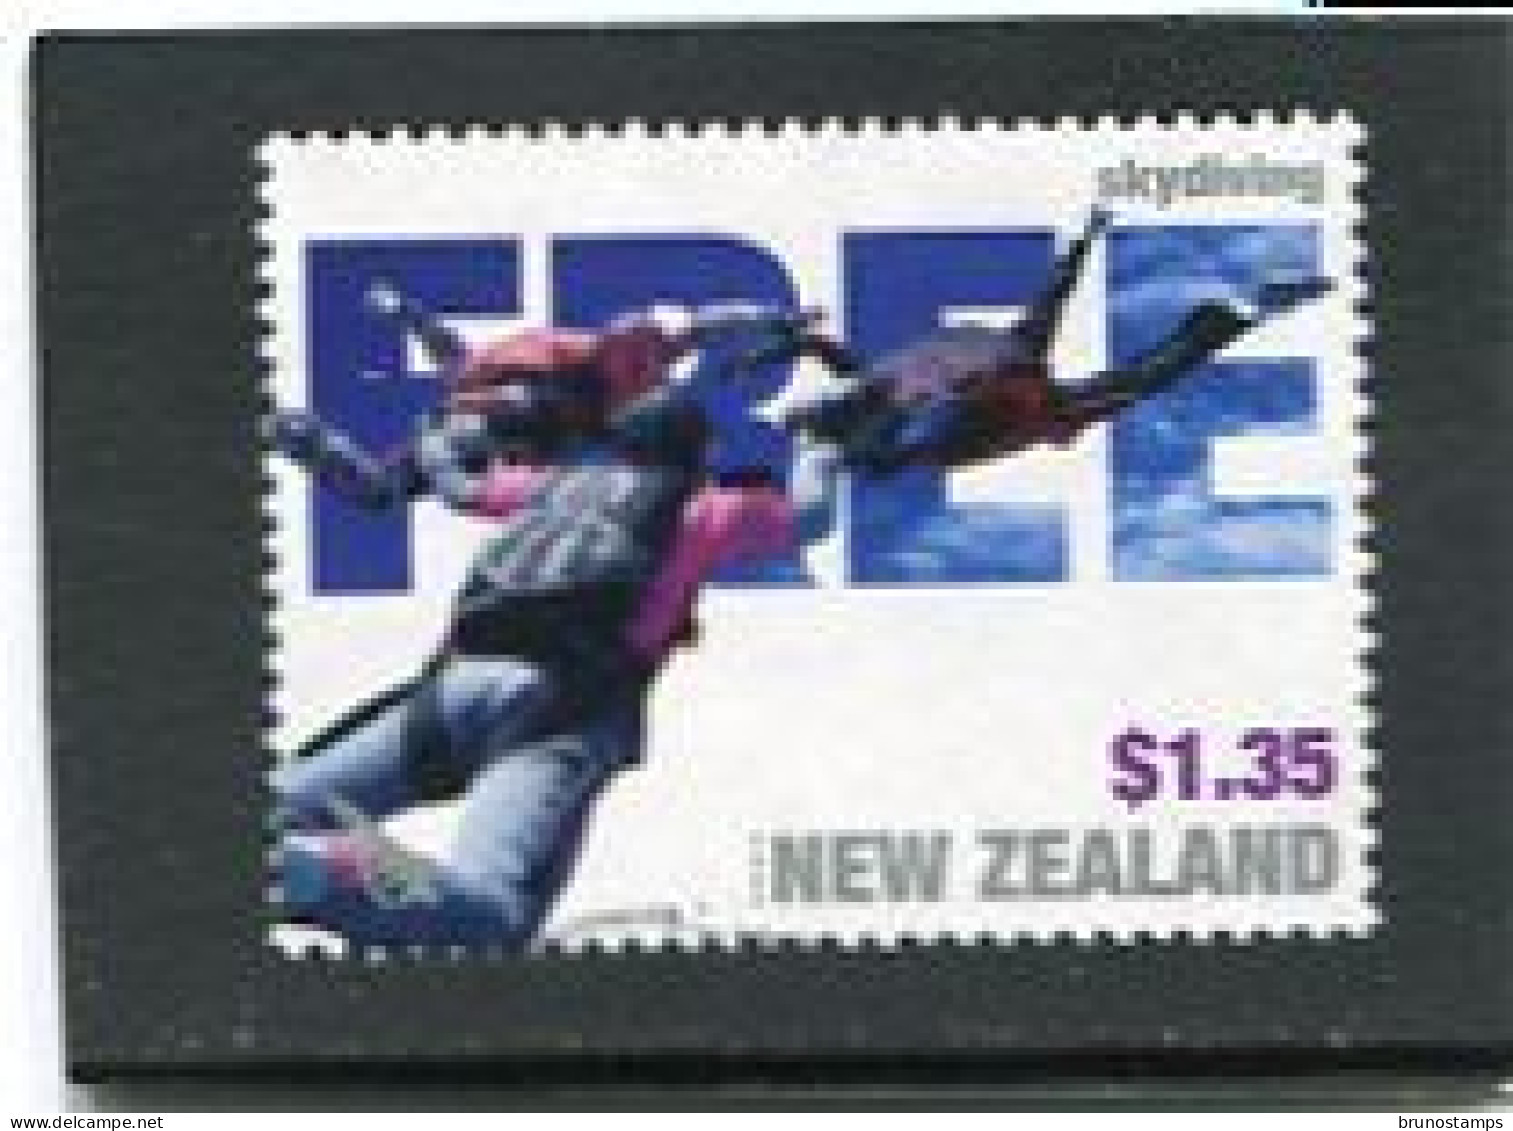 NEW ZEALAND - 2004  1.35$  EXTREME SPORTS  FINE  USED - Used Stamps